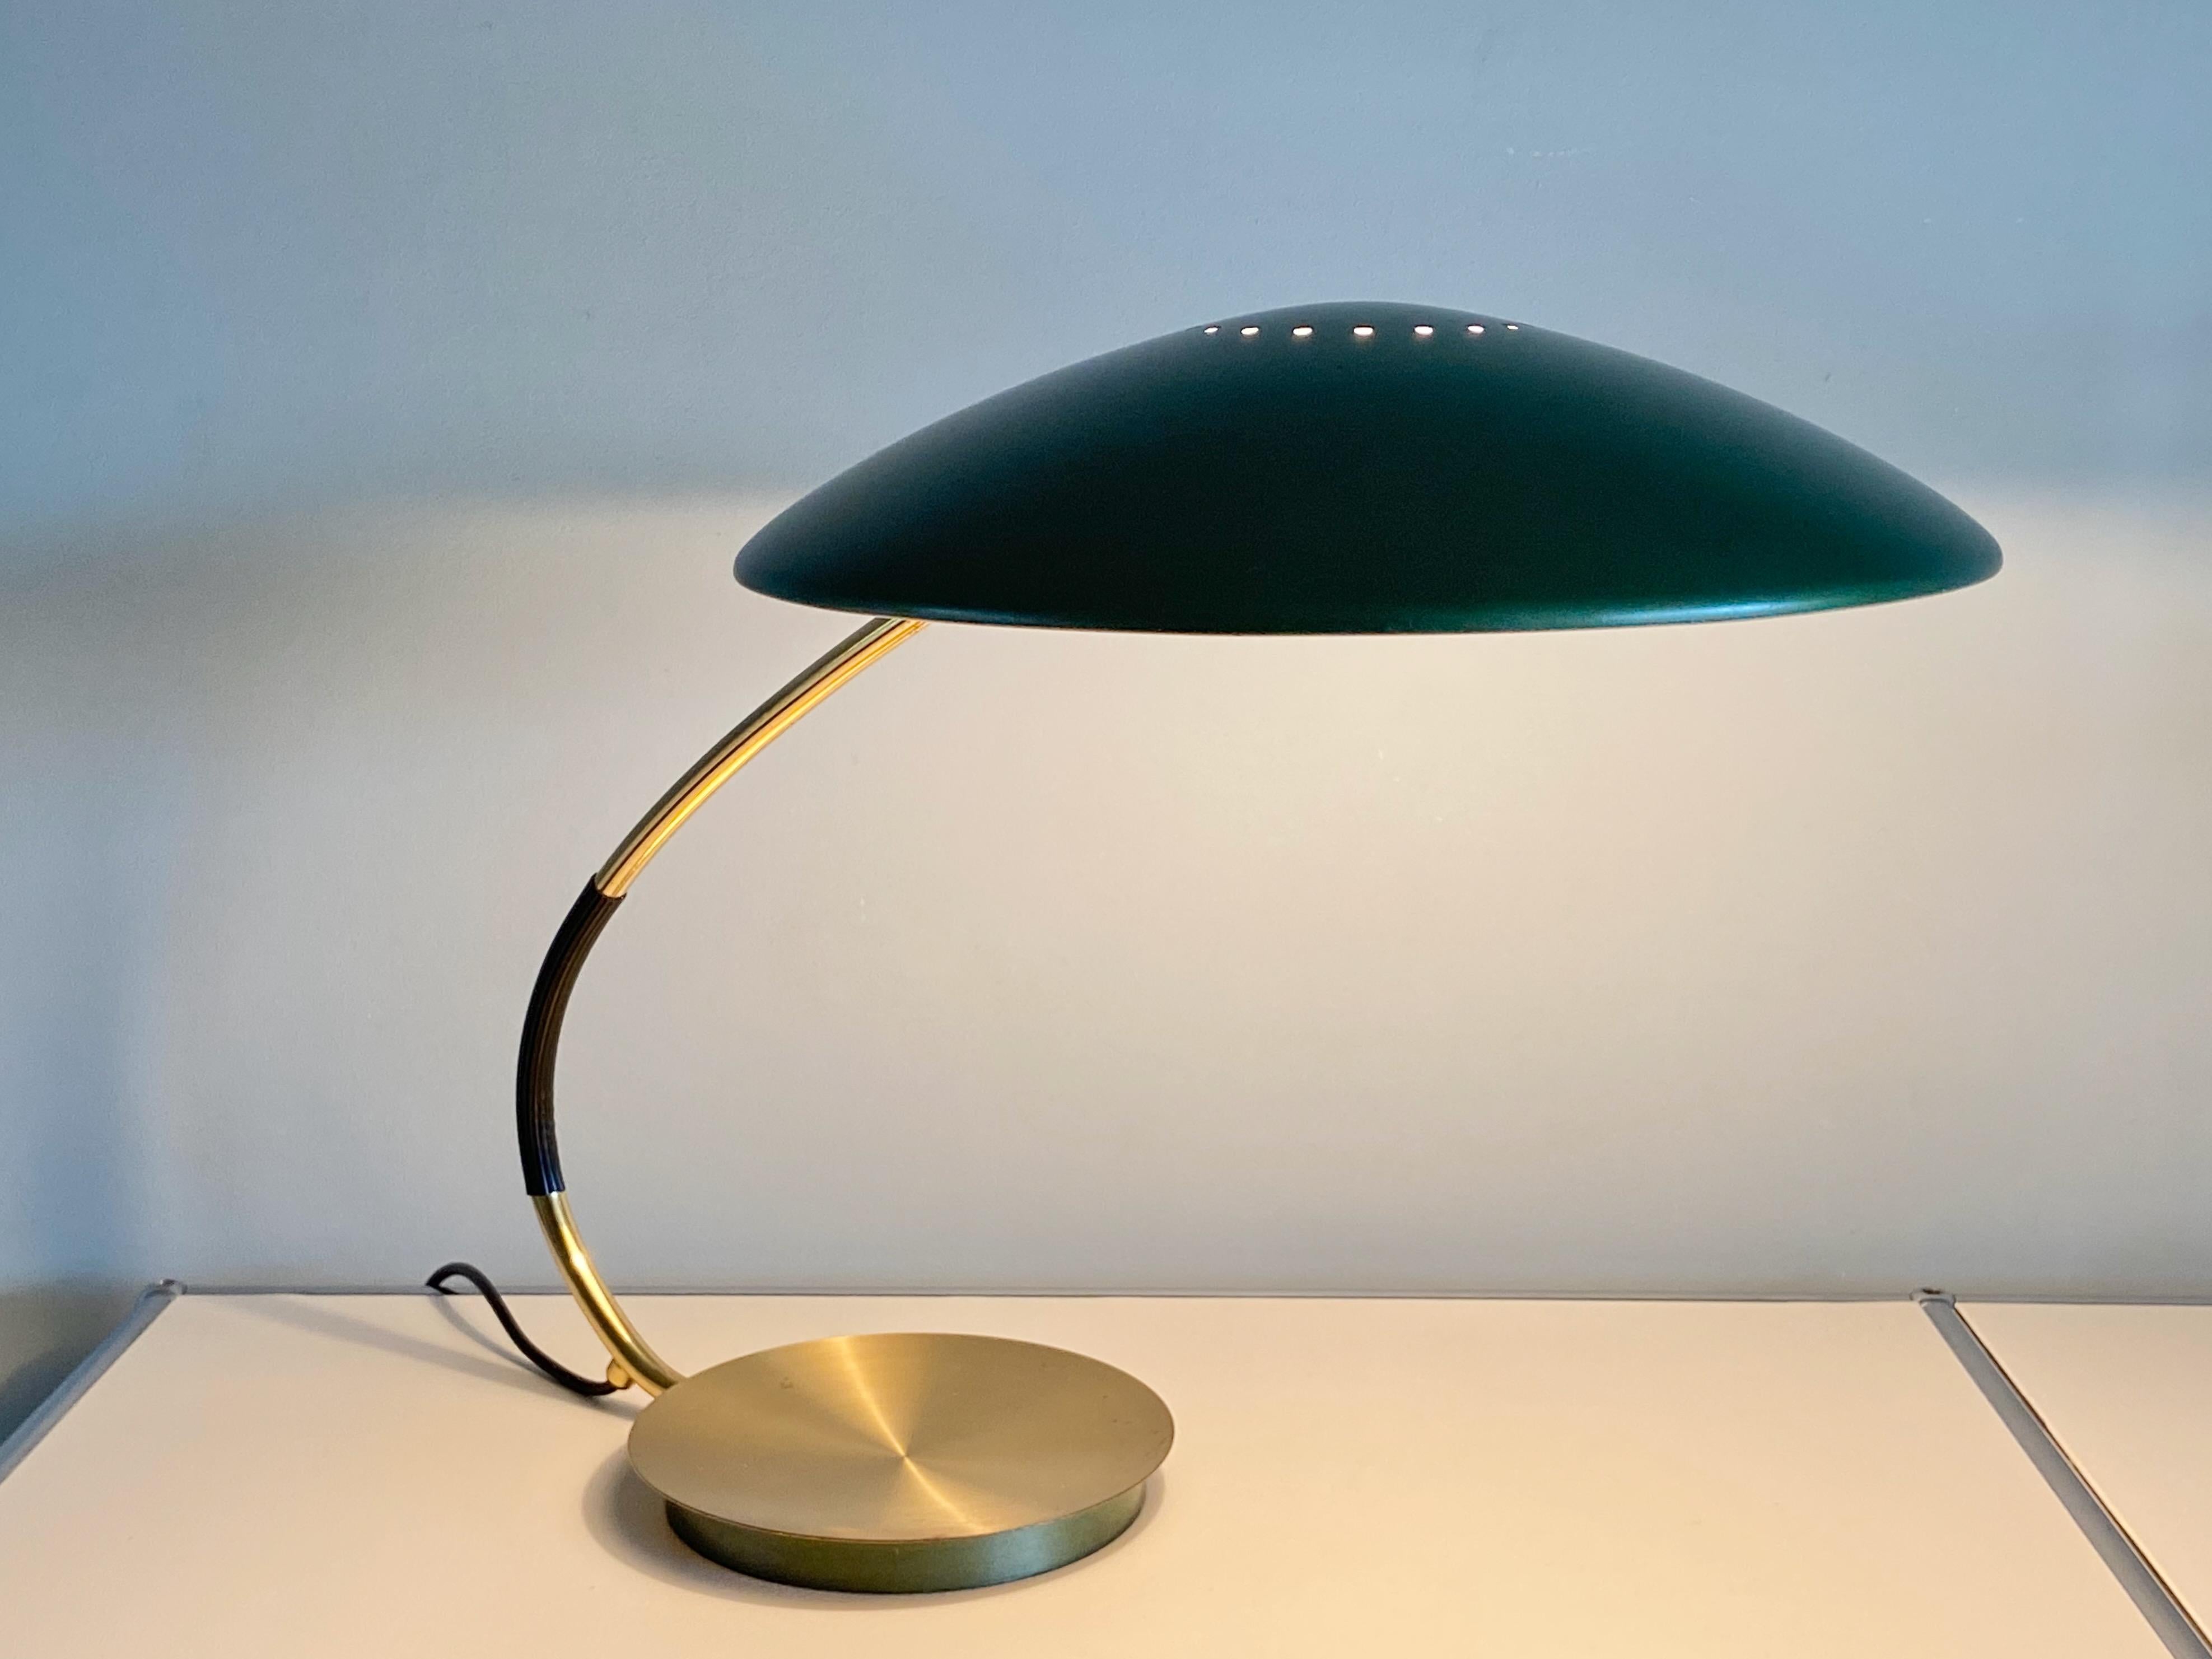 Mid-20th Century Christian Dell Table Lamp 6787 Desk Lamp by Kaiser Idell, 1950s, Germany